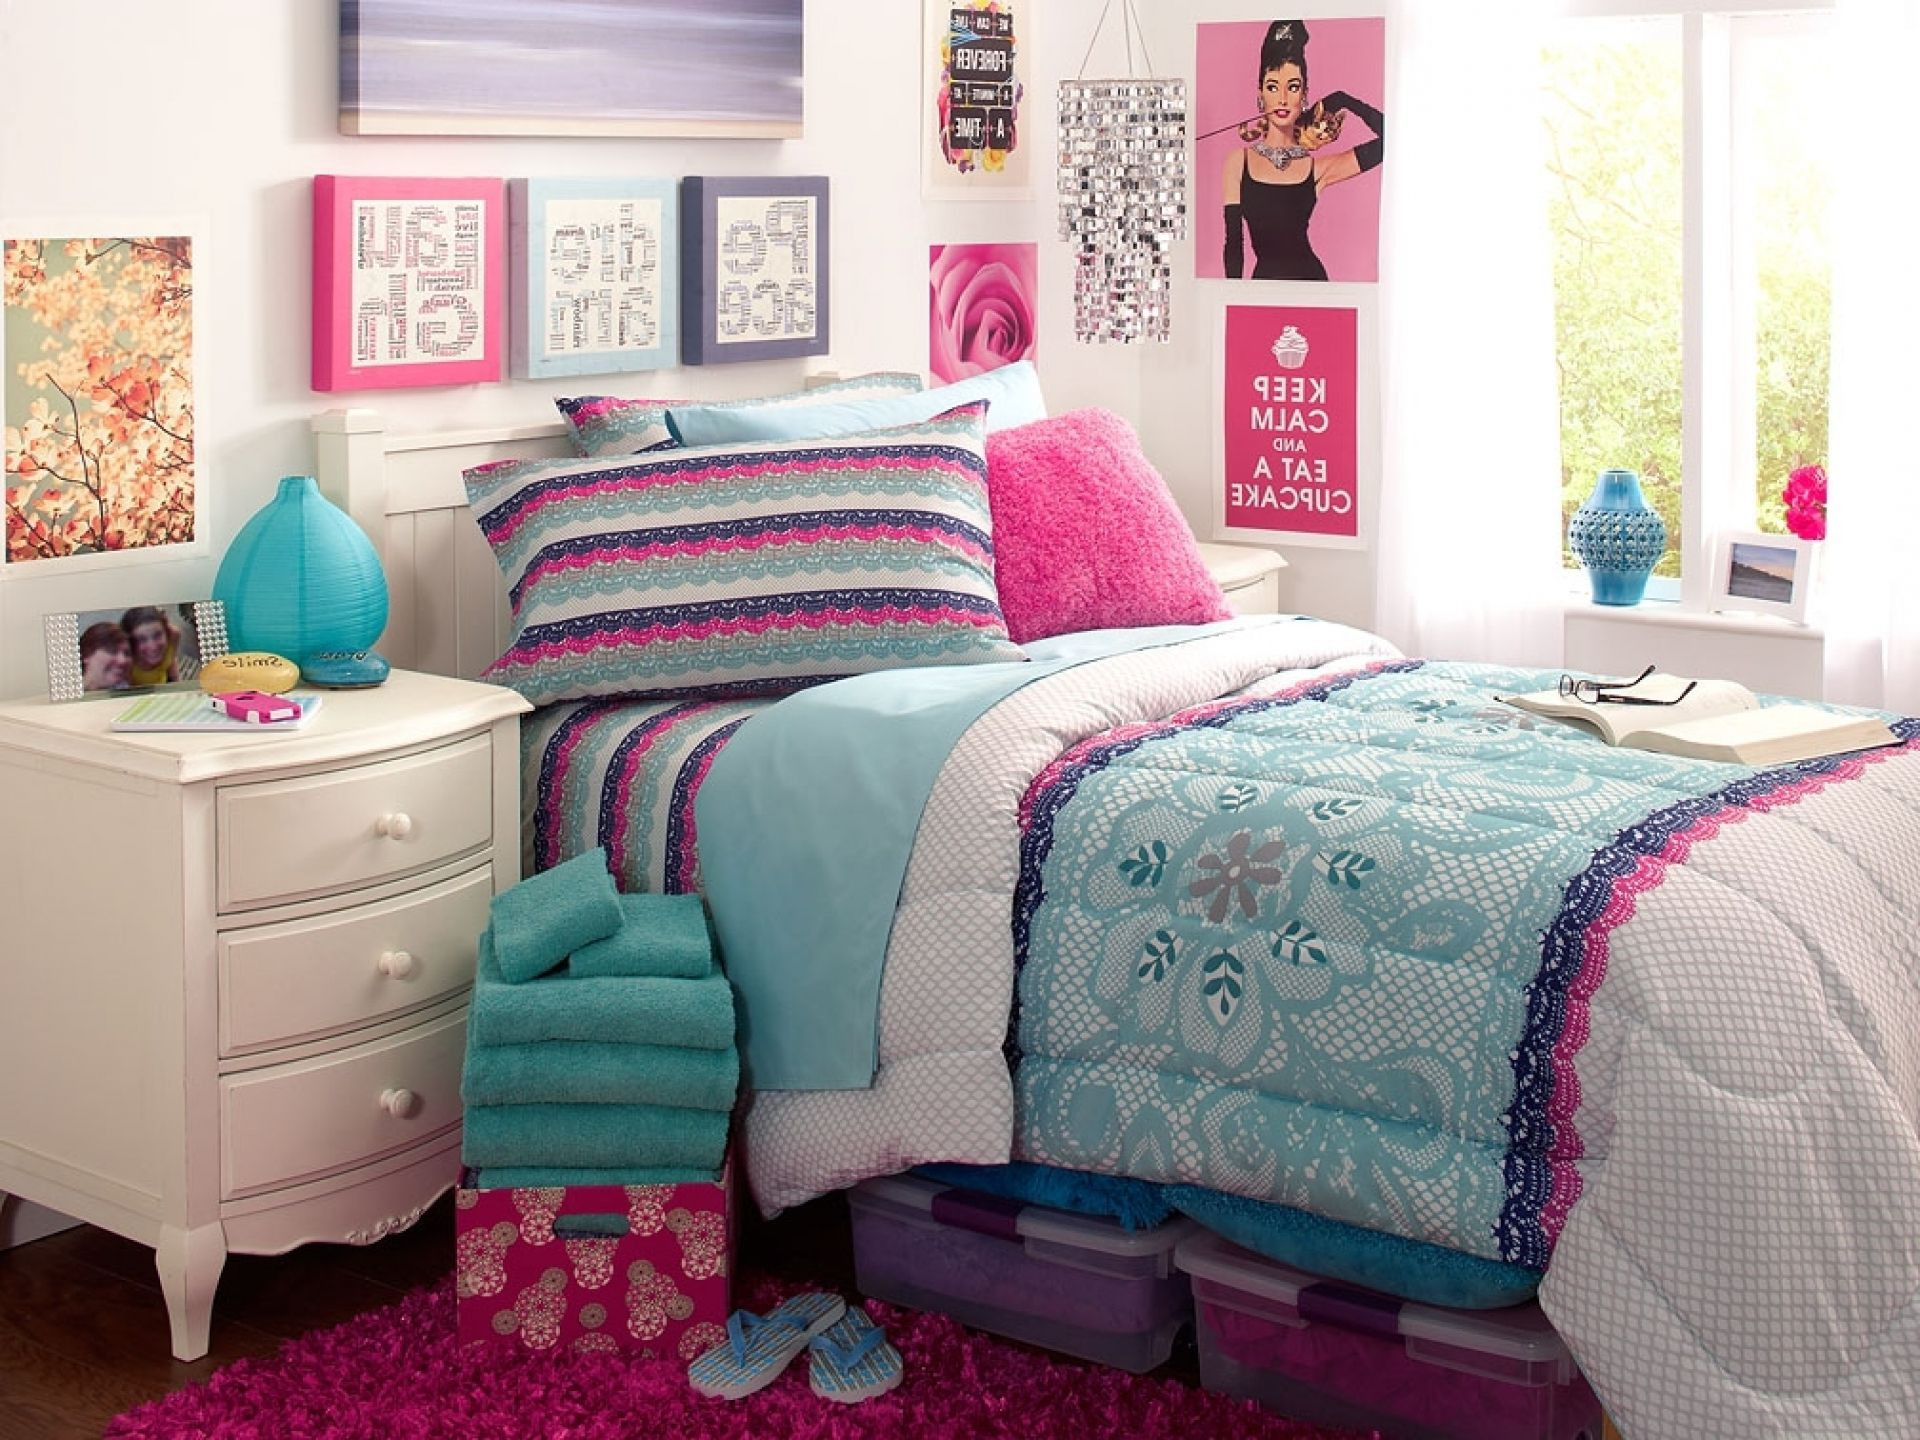 DIY Bedroom Decorations For Teens
 Some Helpful Tips and Inspiring Ideas for the DIY Project